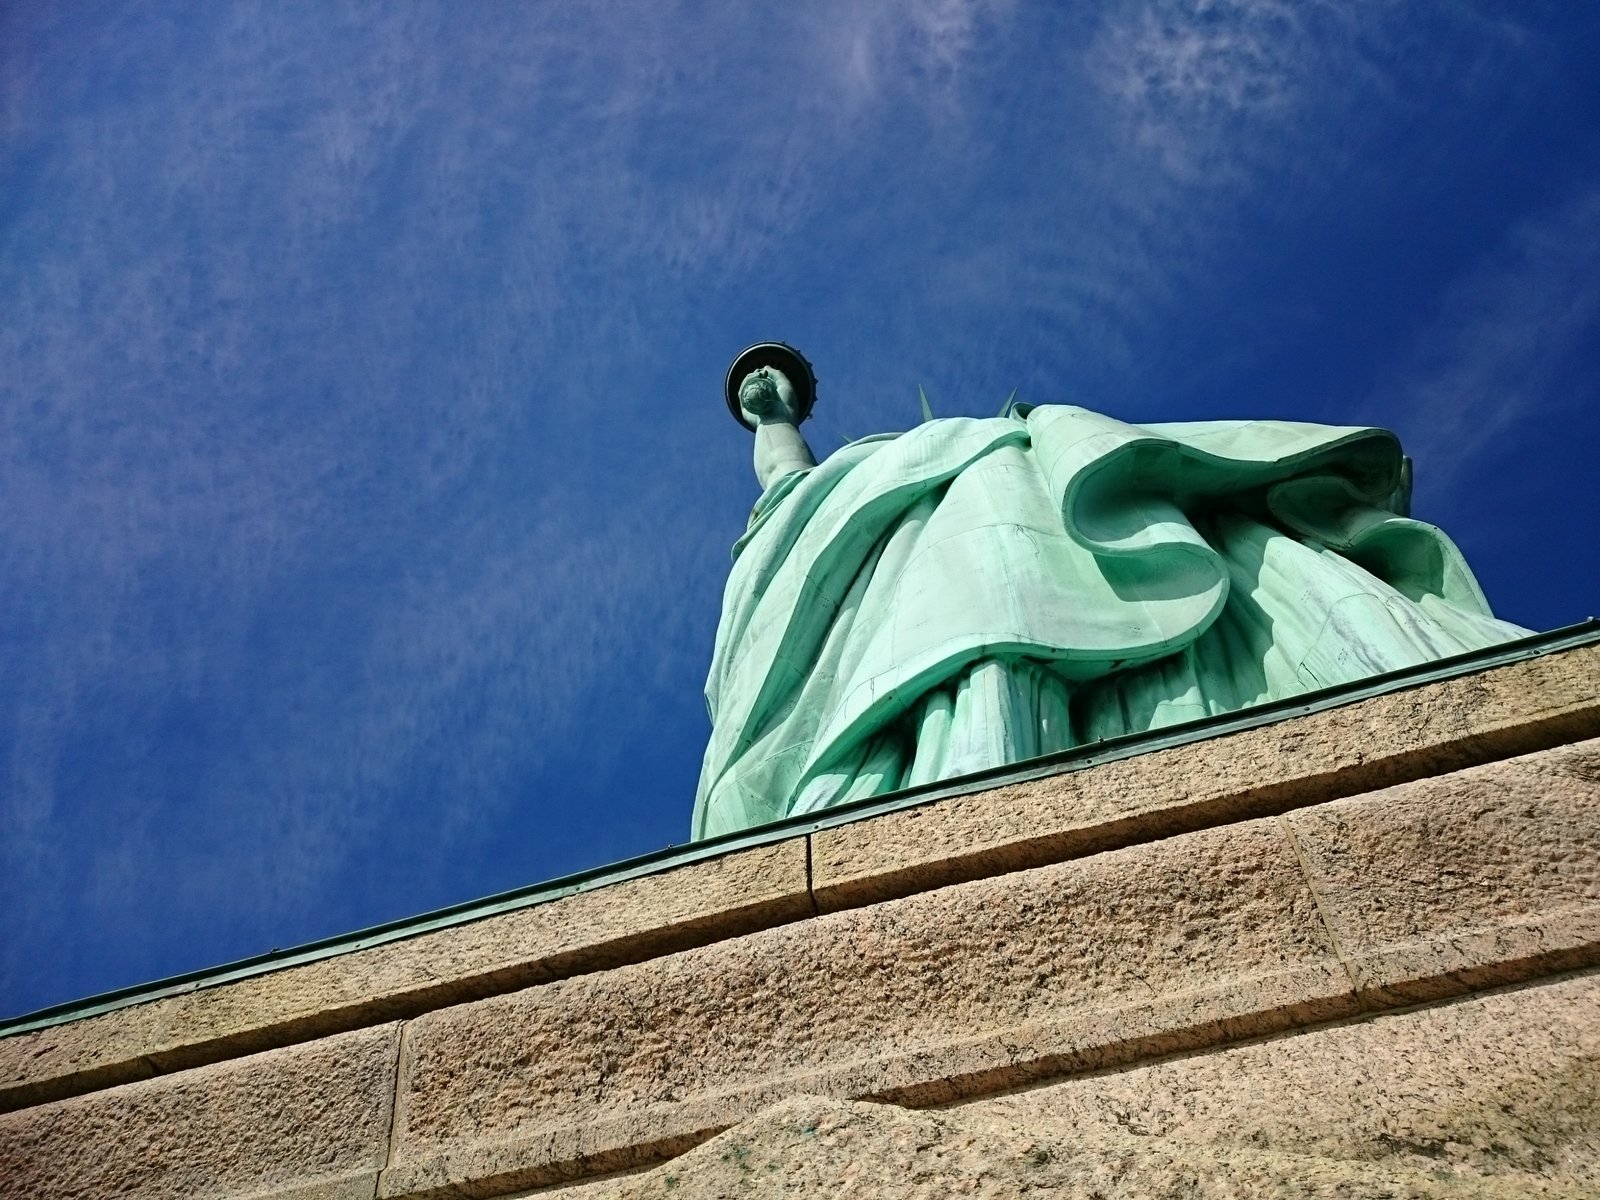 the statue of liberty's head and hands are in perspective